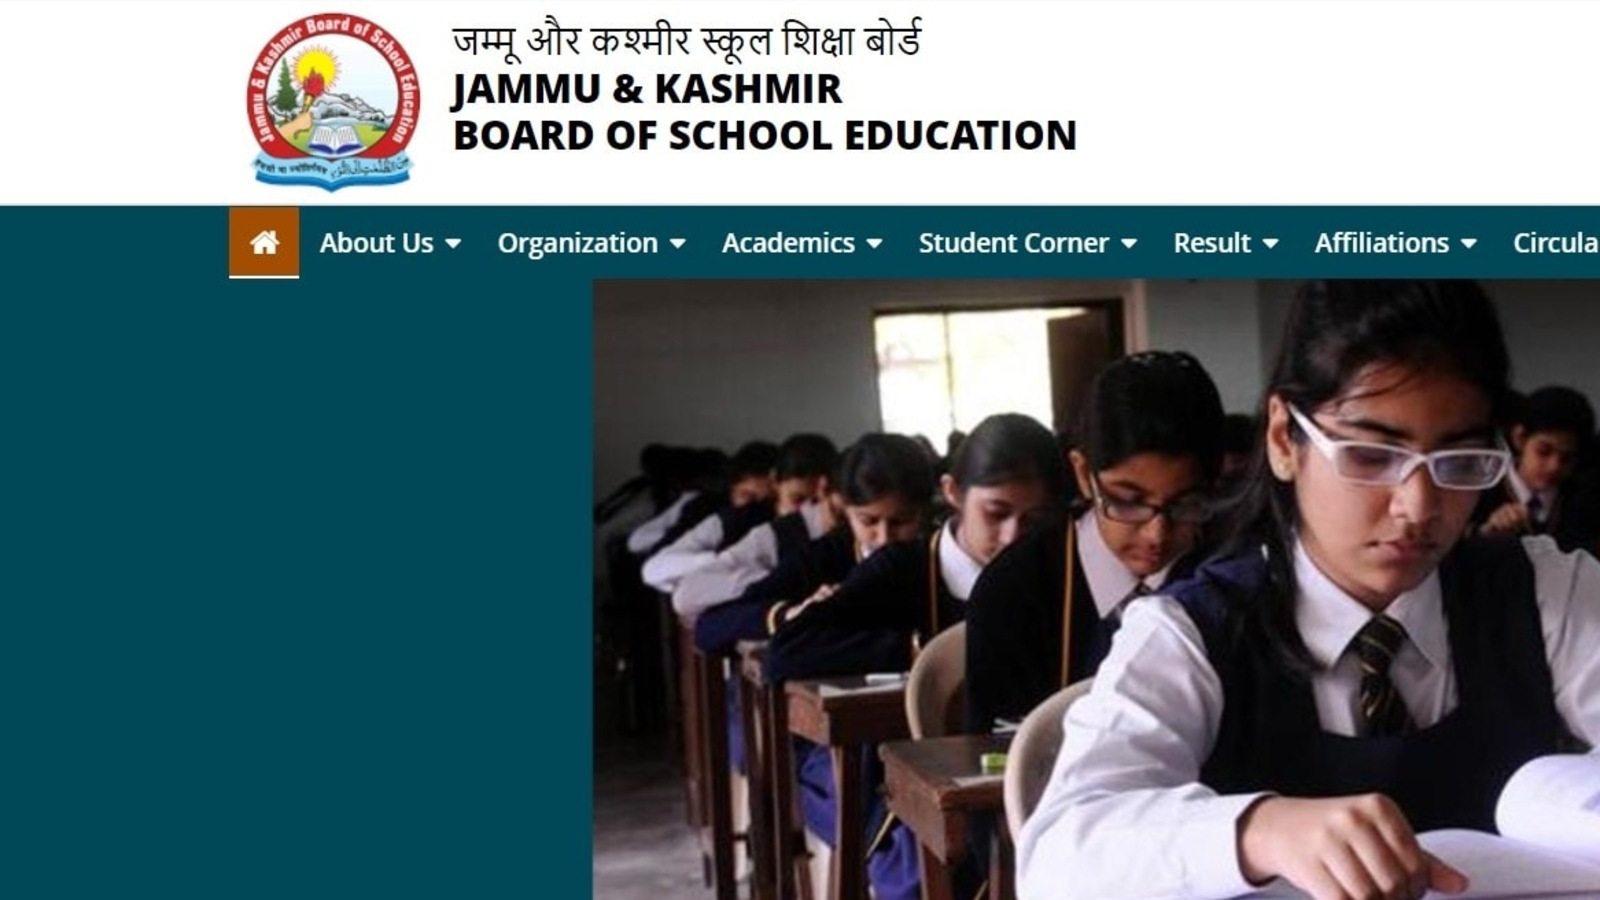 JKBOSE Leh Division result declared for class 10 and 12th at jkbose.nic.in